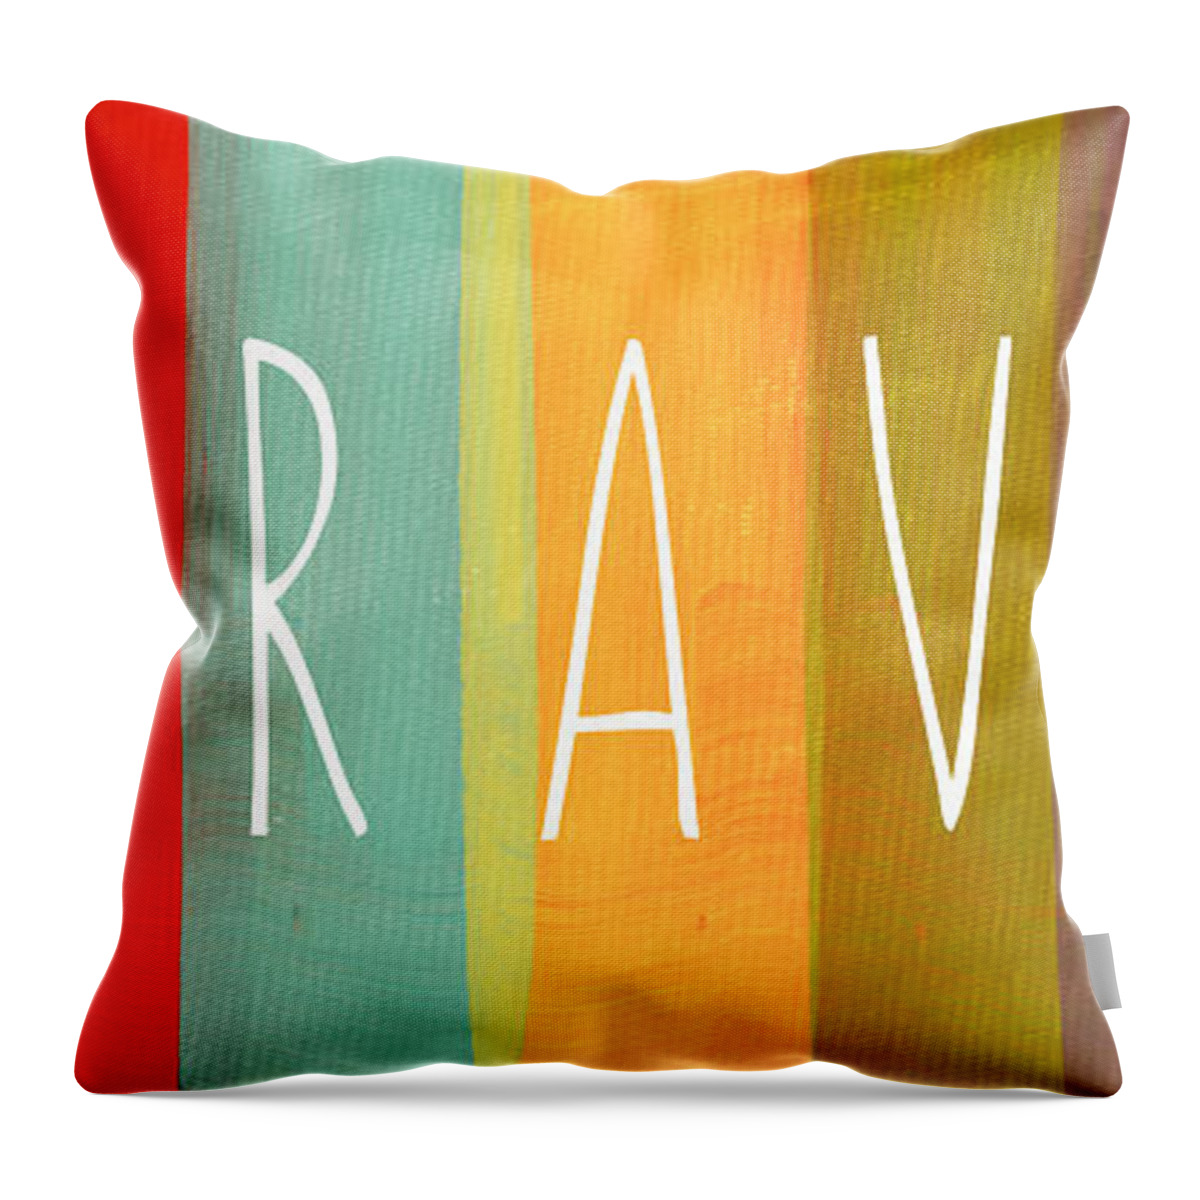 Brave Throw Pillow featuring the painting Brave by Linda Woods